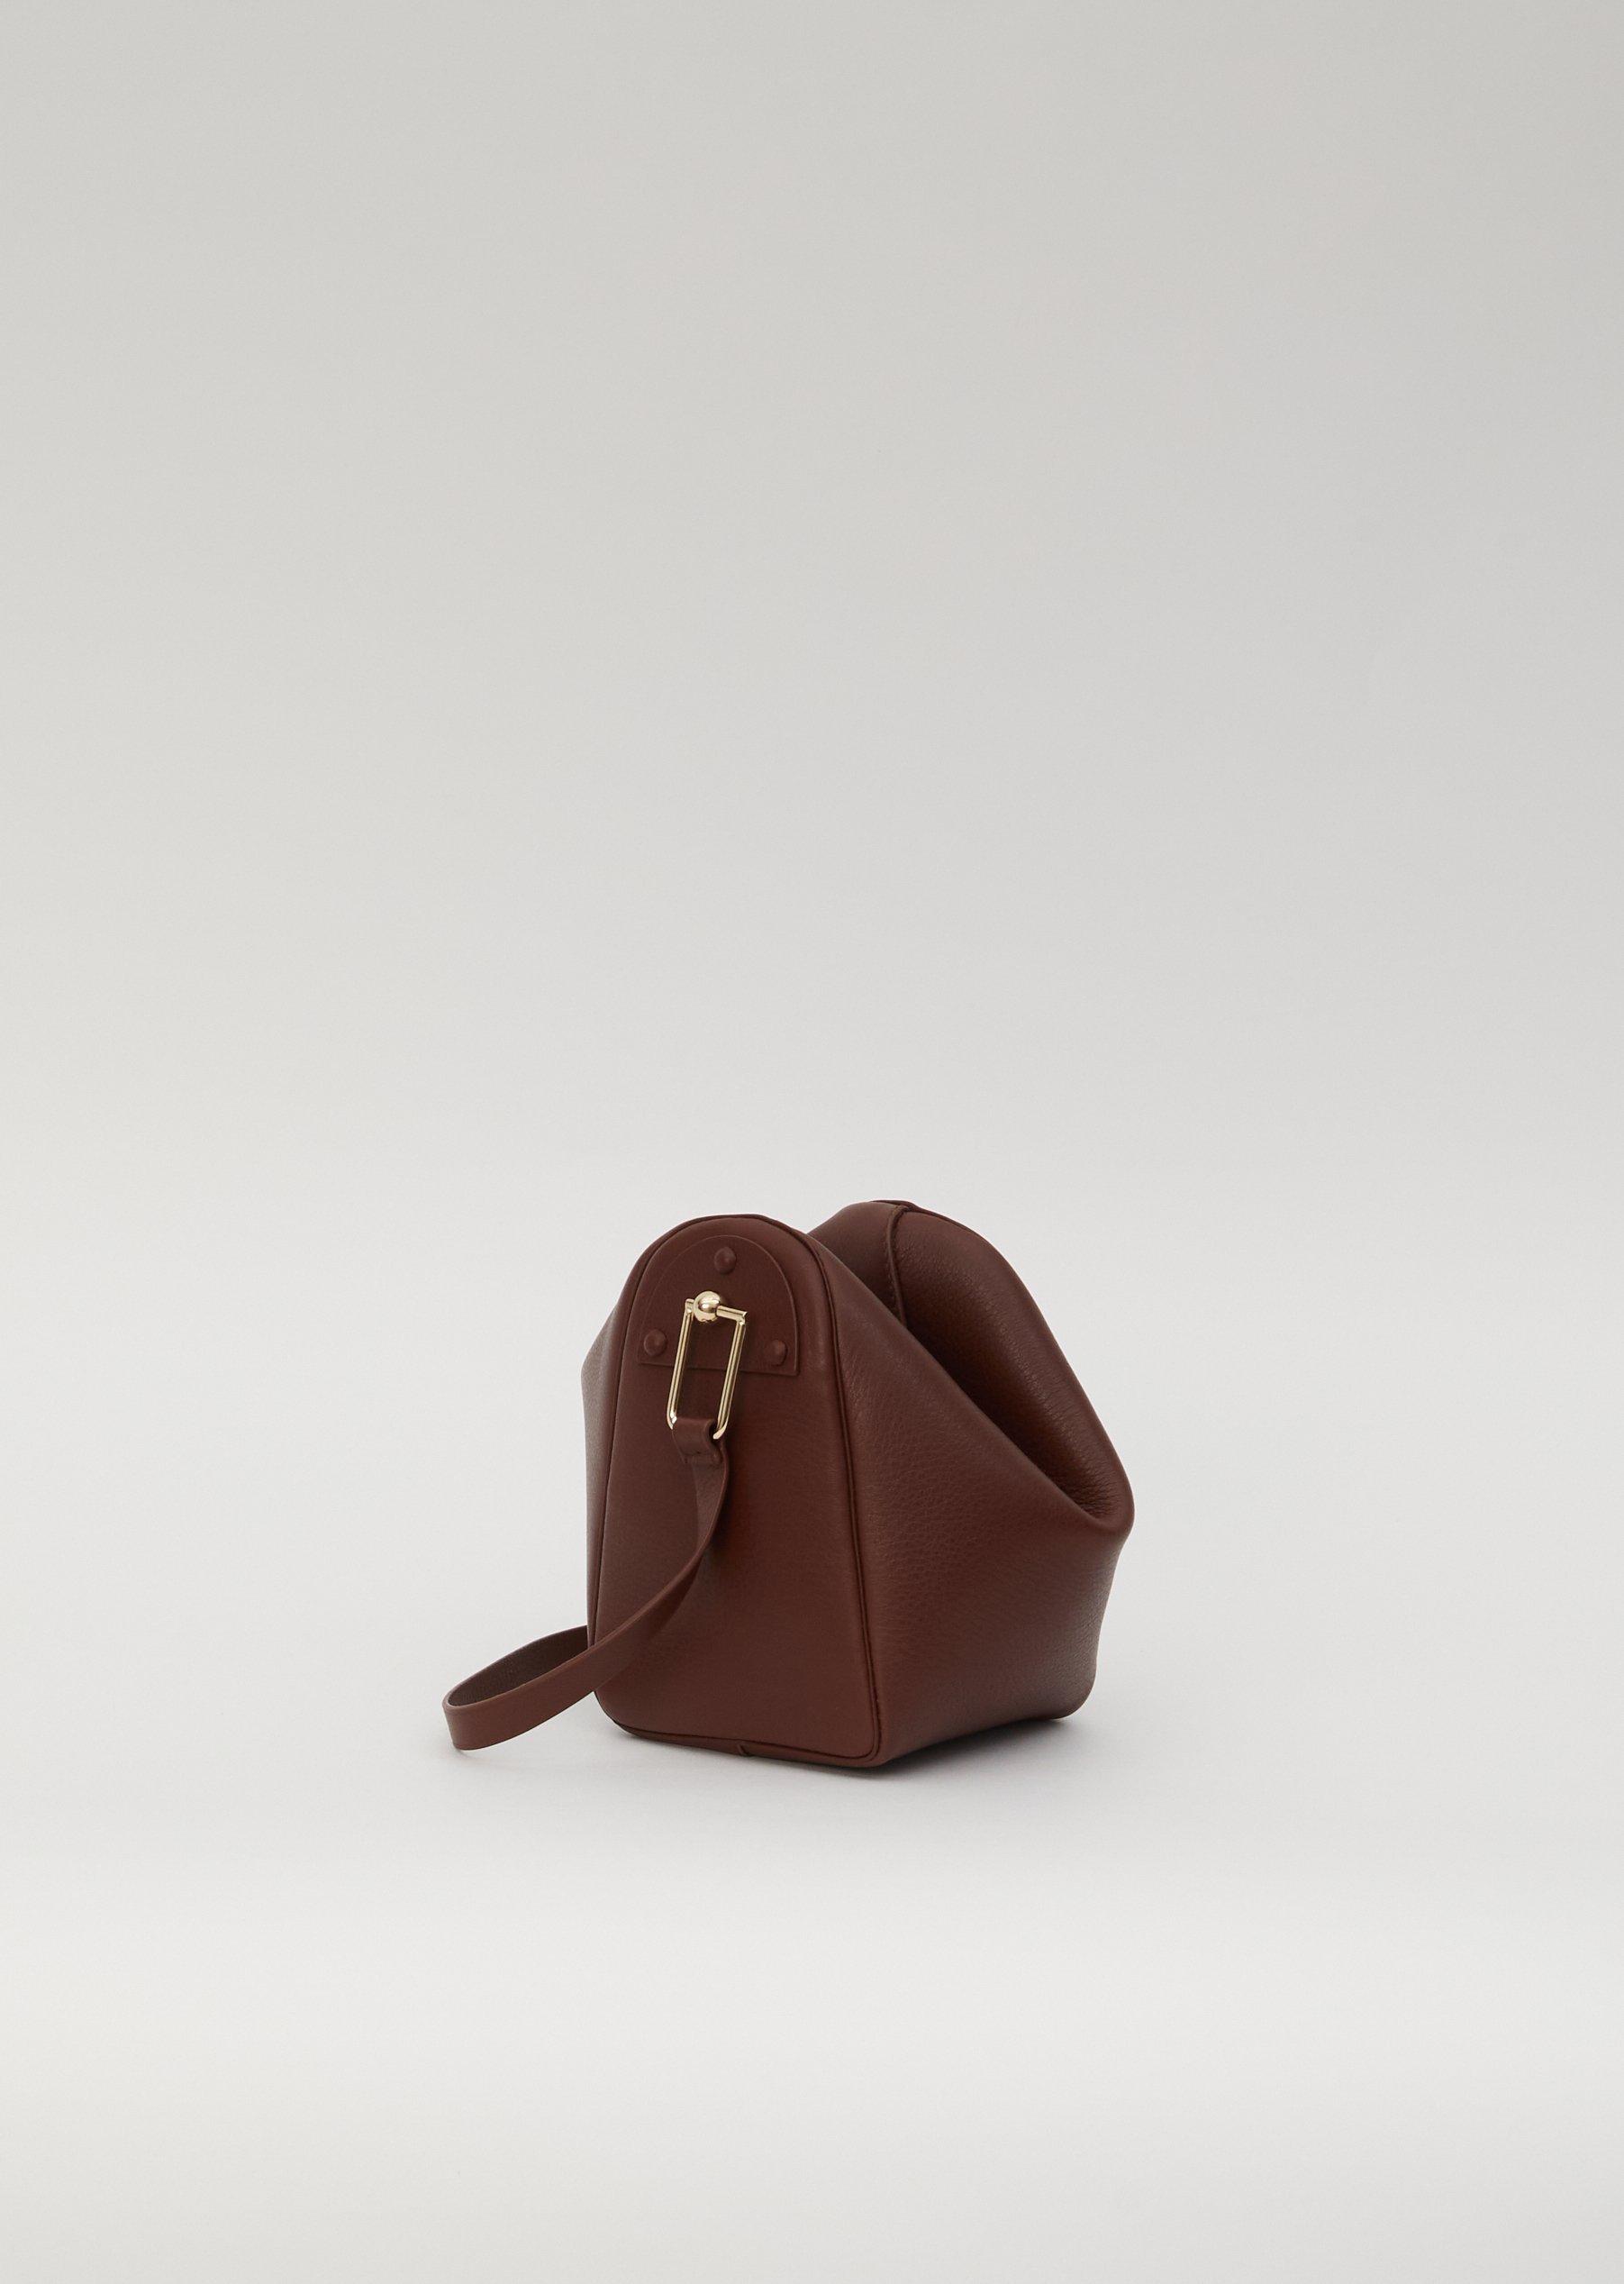 Lemaire Small Folded Bag in Brown | Lyst